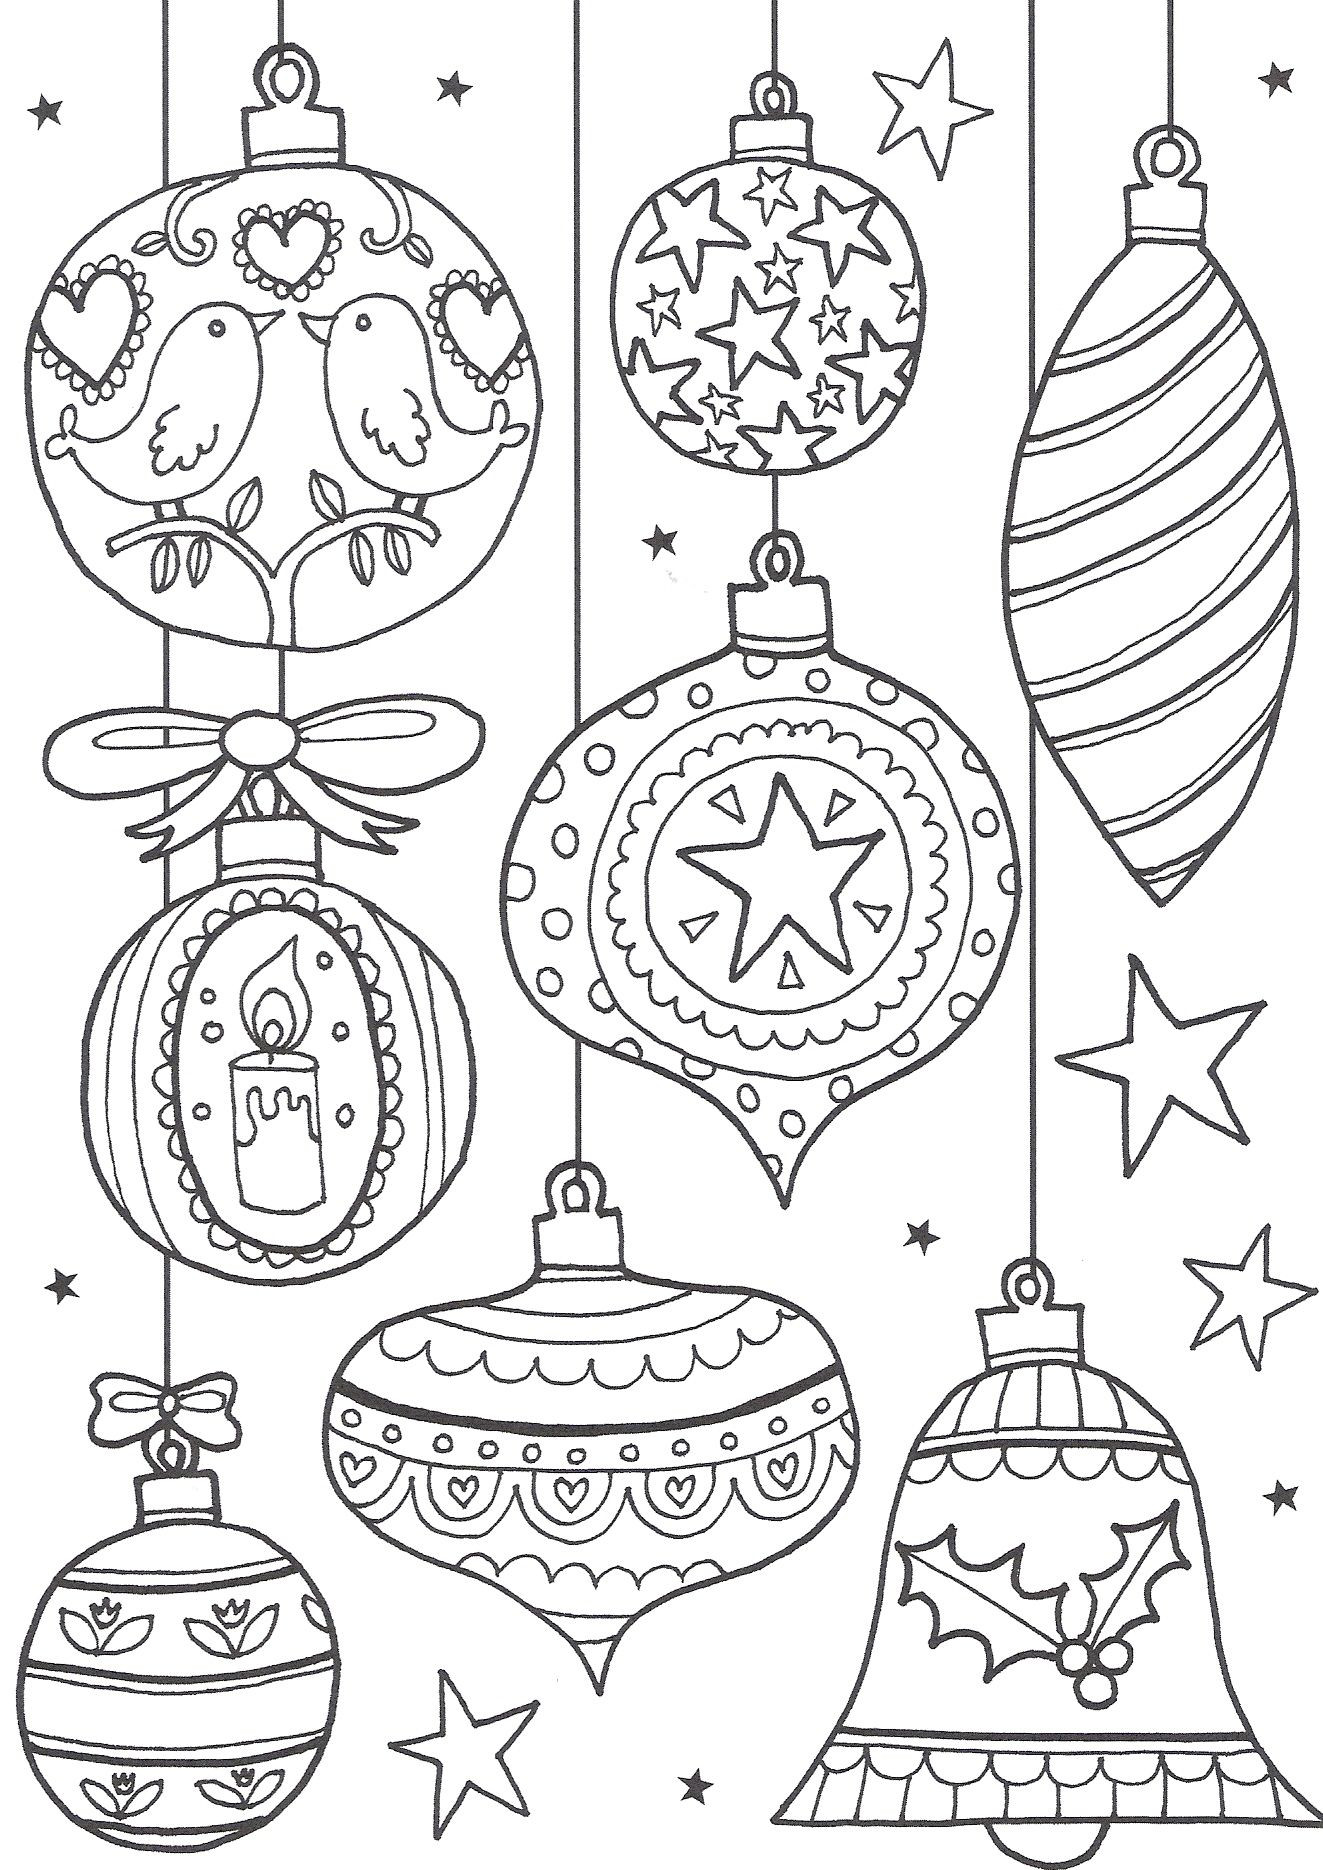 Christmas Printable Coloring Sheets
 Free Christmas Colouring Pages for Adults The Ultimate